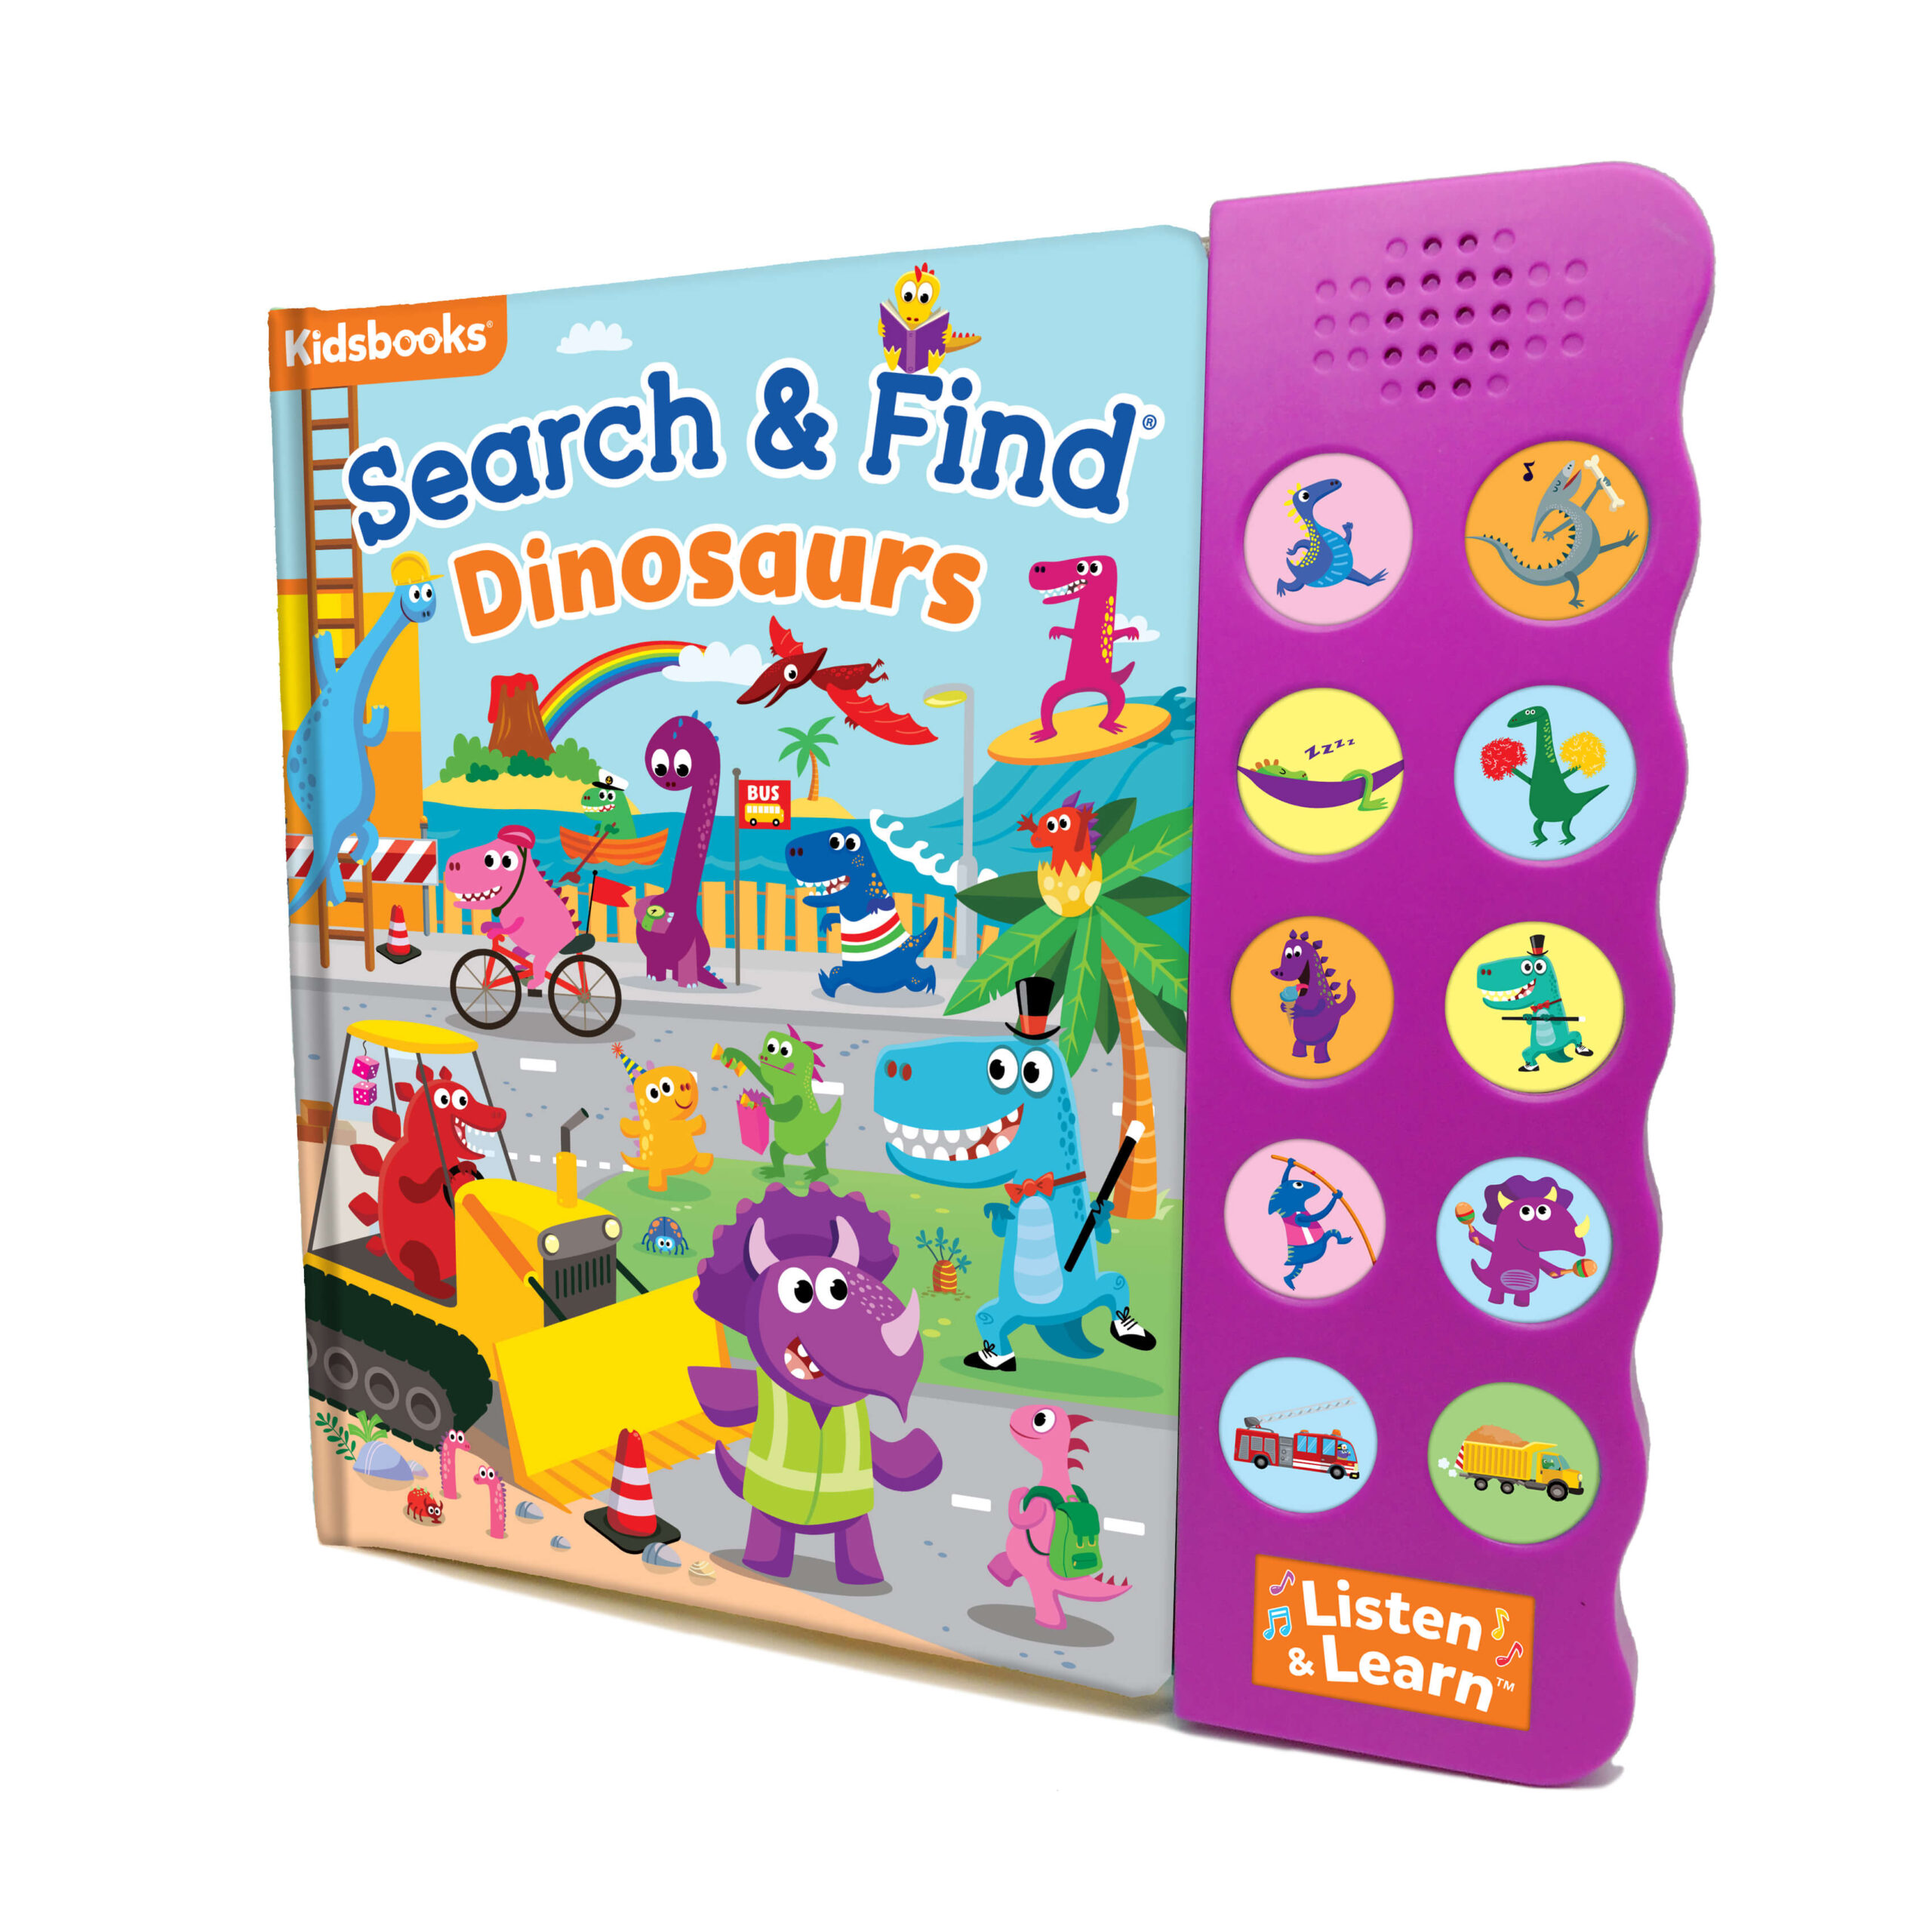 Search & Find: Dinosaurs